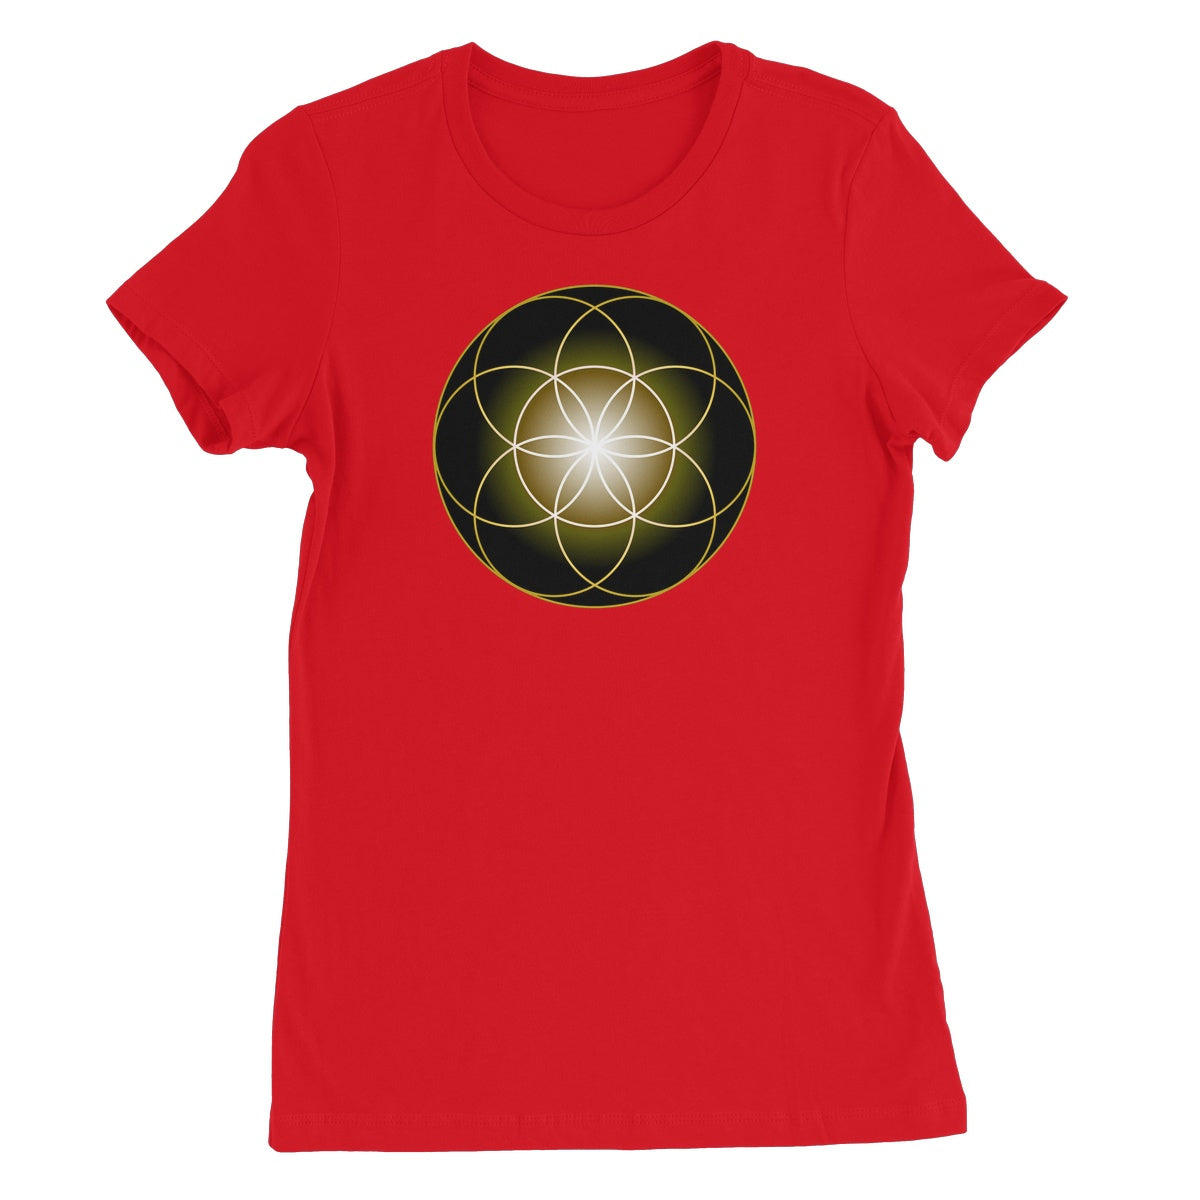 Seed of Life in Gold Women's Favourite T-Shirt - Nature of Flowers